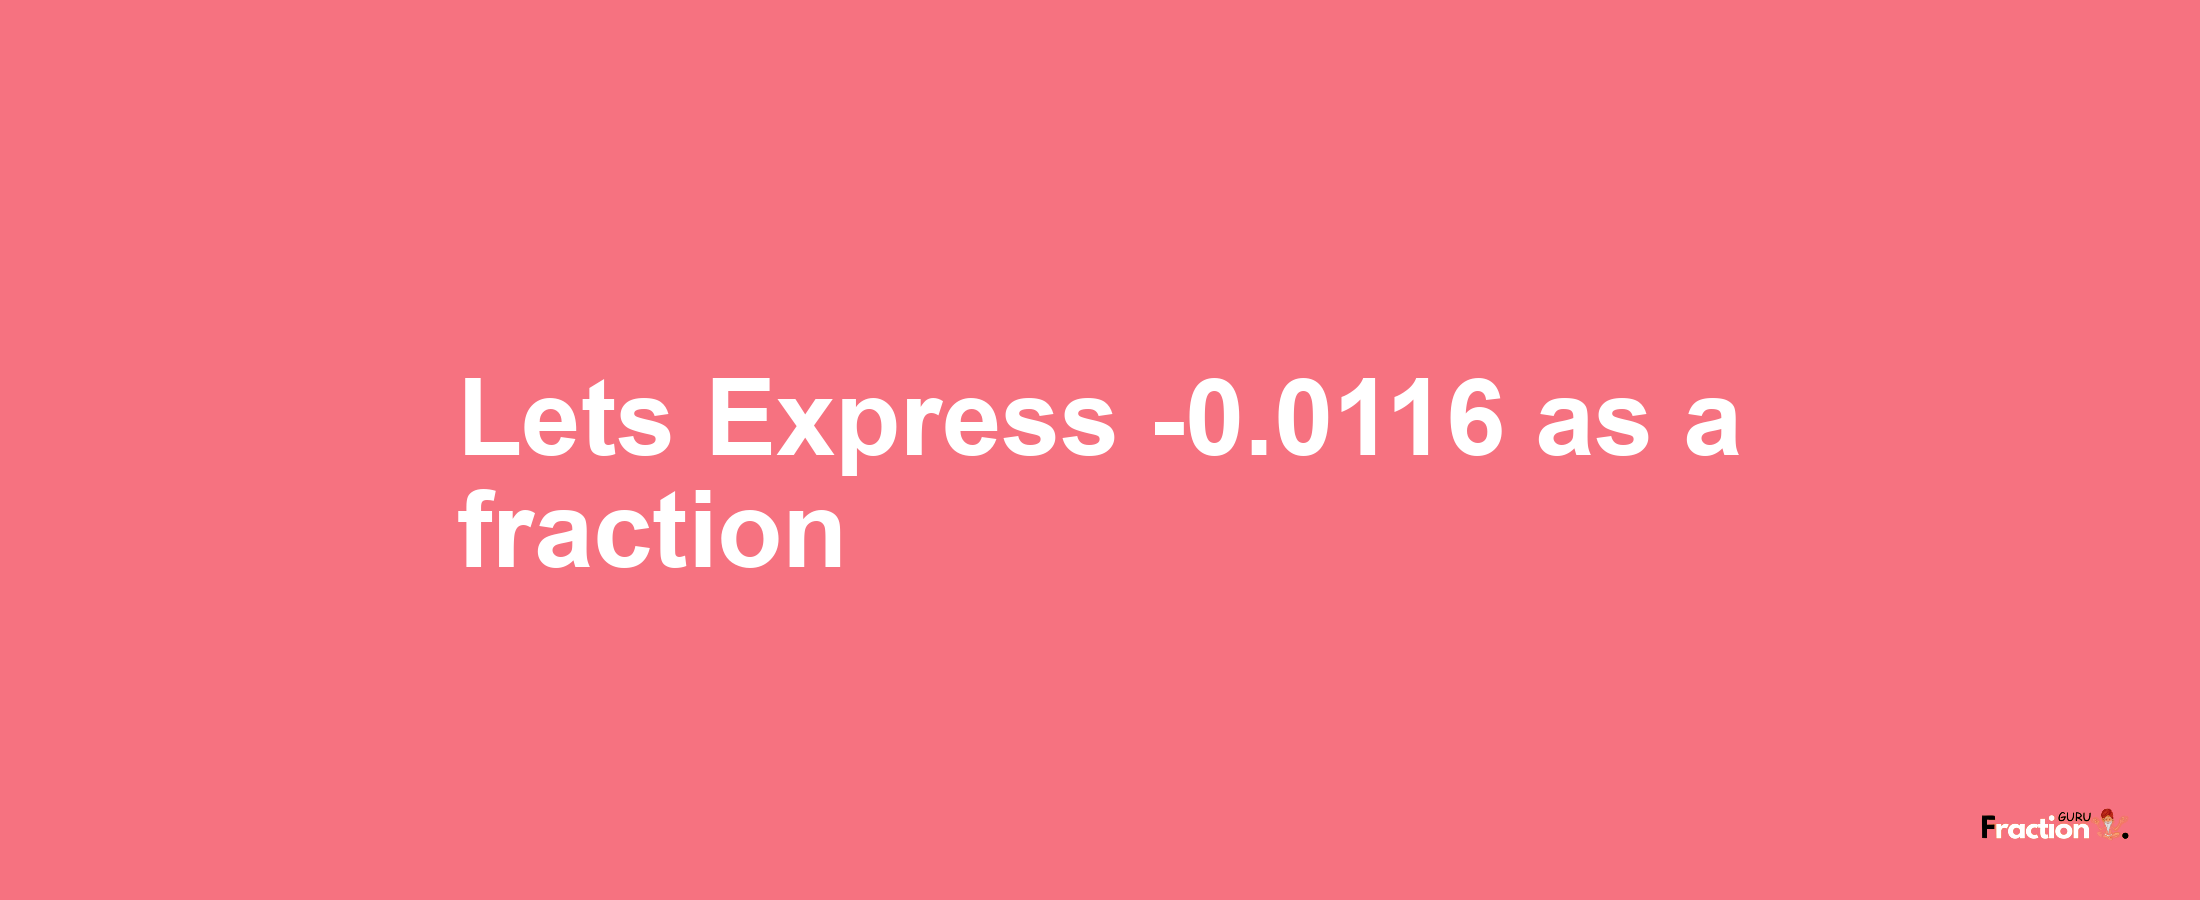 Lets Express -0.0116 as afraction